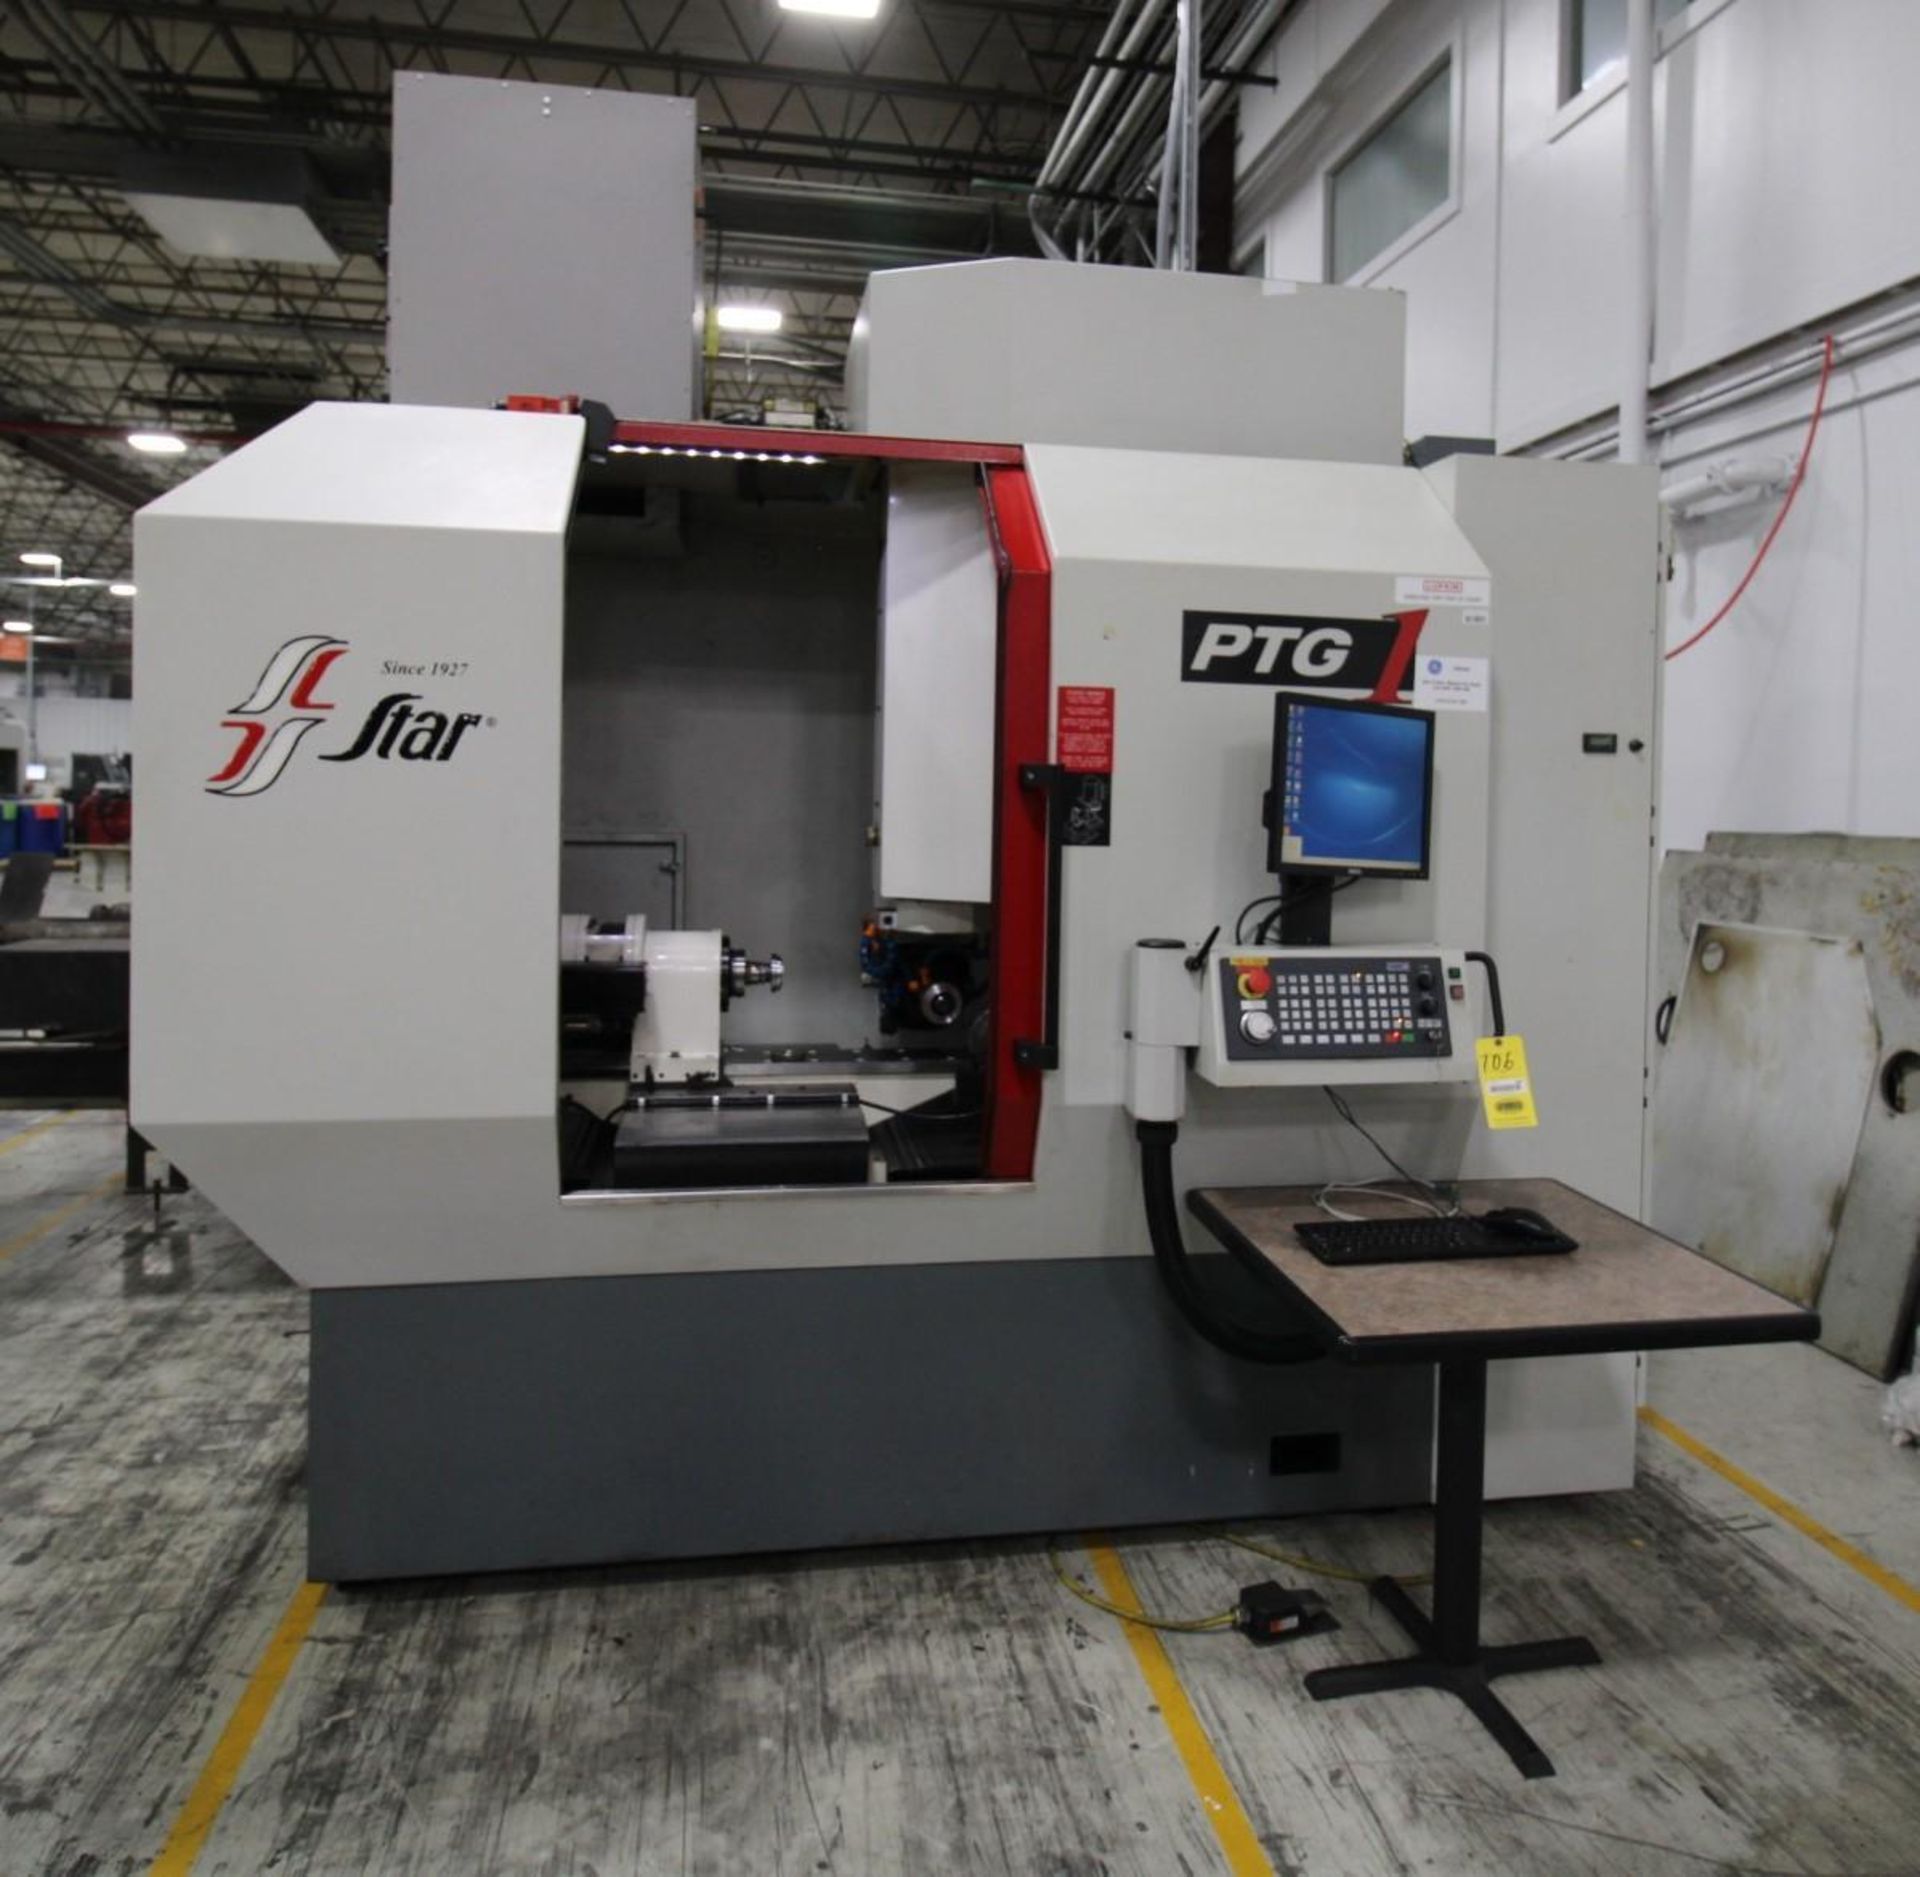 5-AXIS HOB SHARPENING TOOL GRINDER, STAR MDL. PTG-1, new 2012, PLC based, 7.87” max. work piece - Image 2 of 24